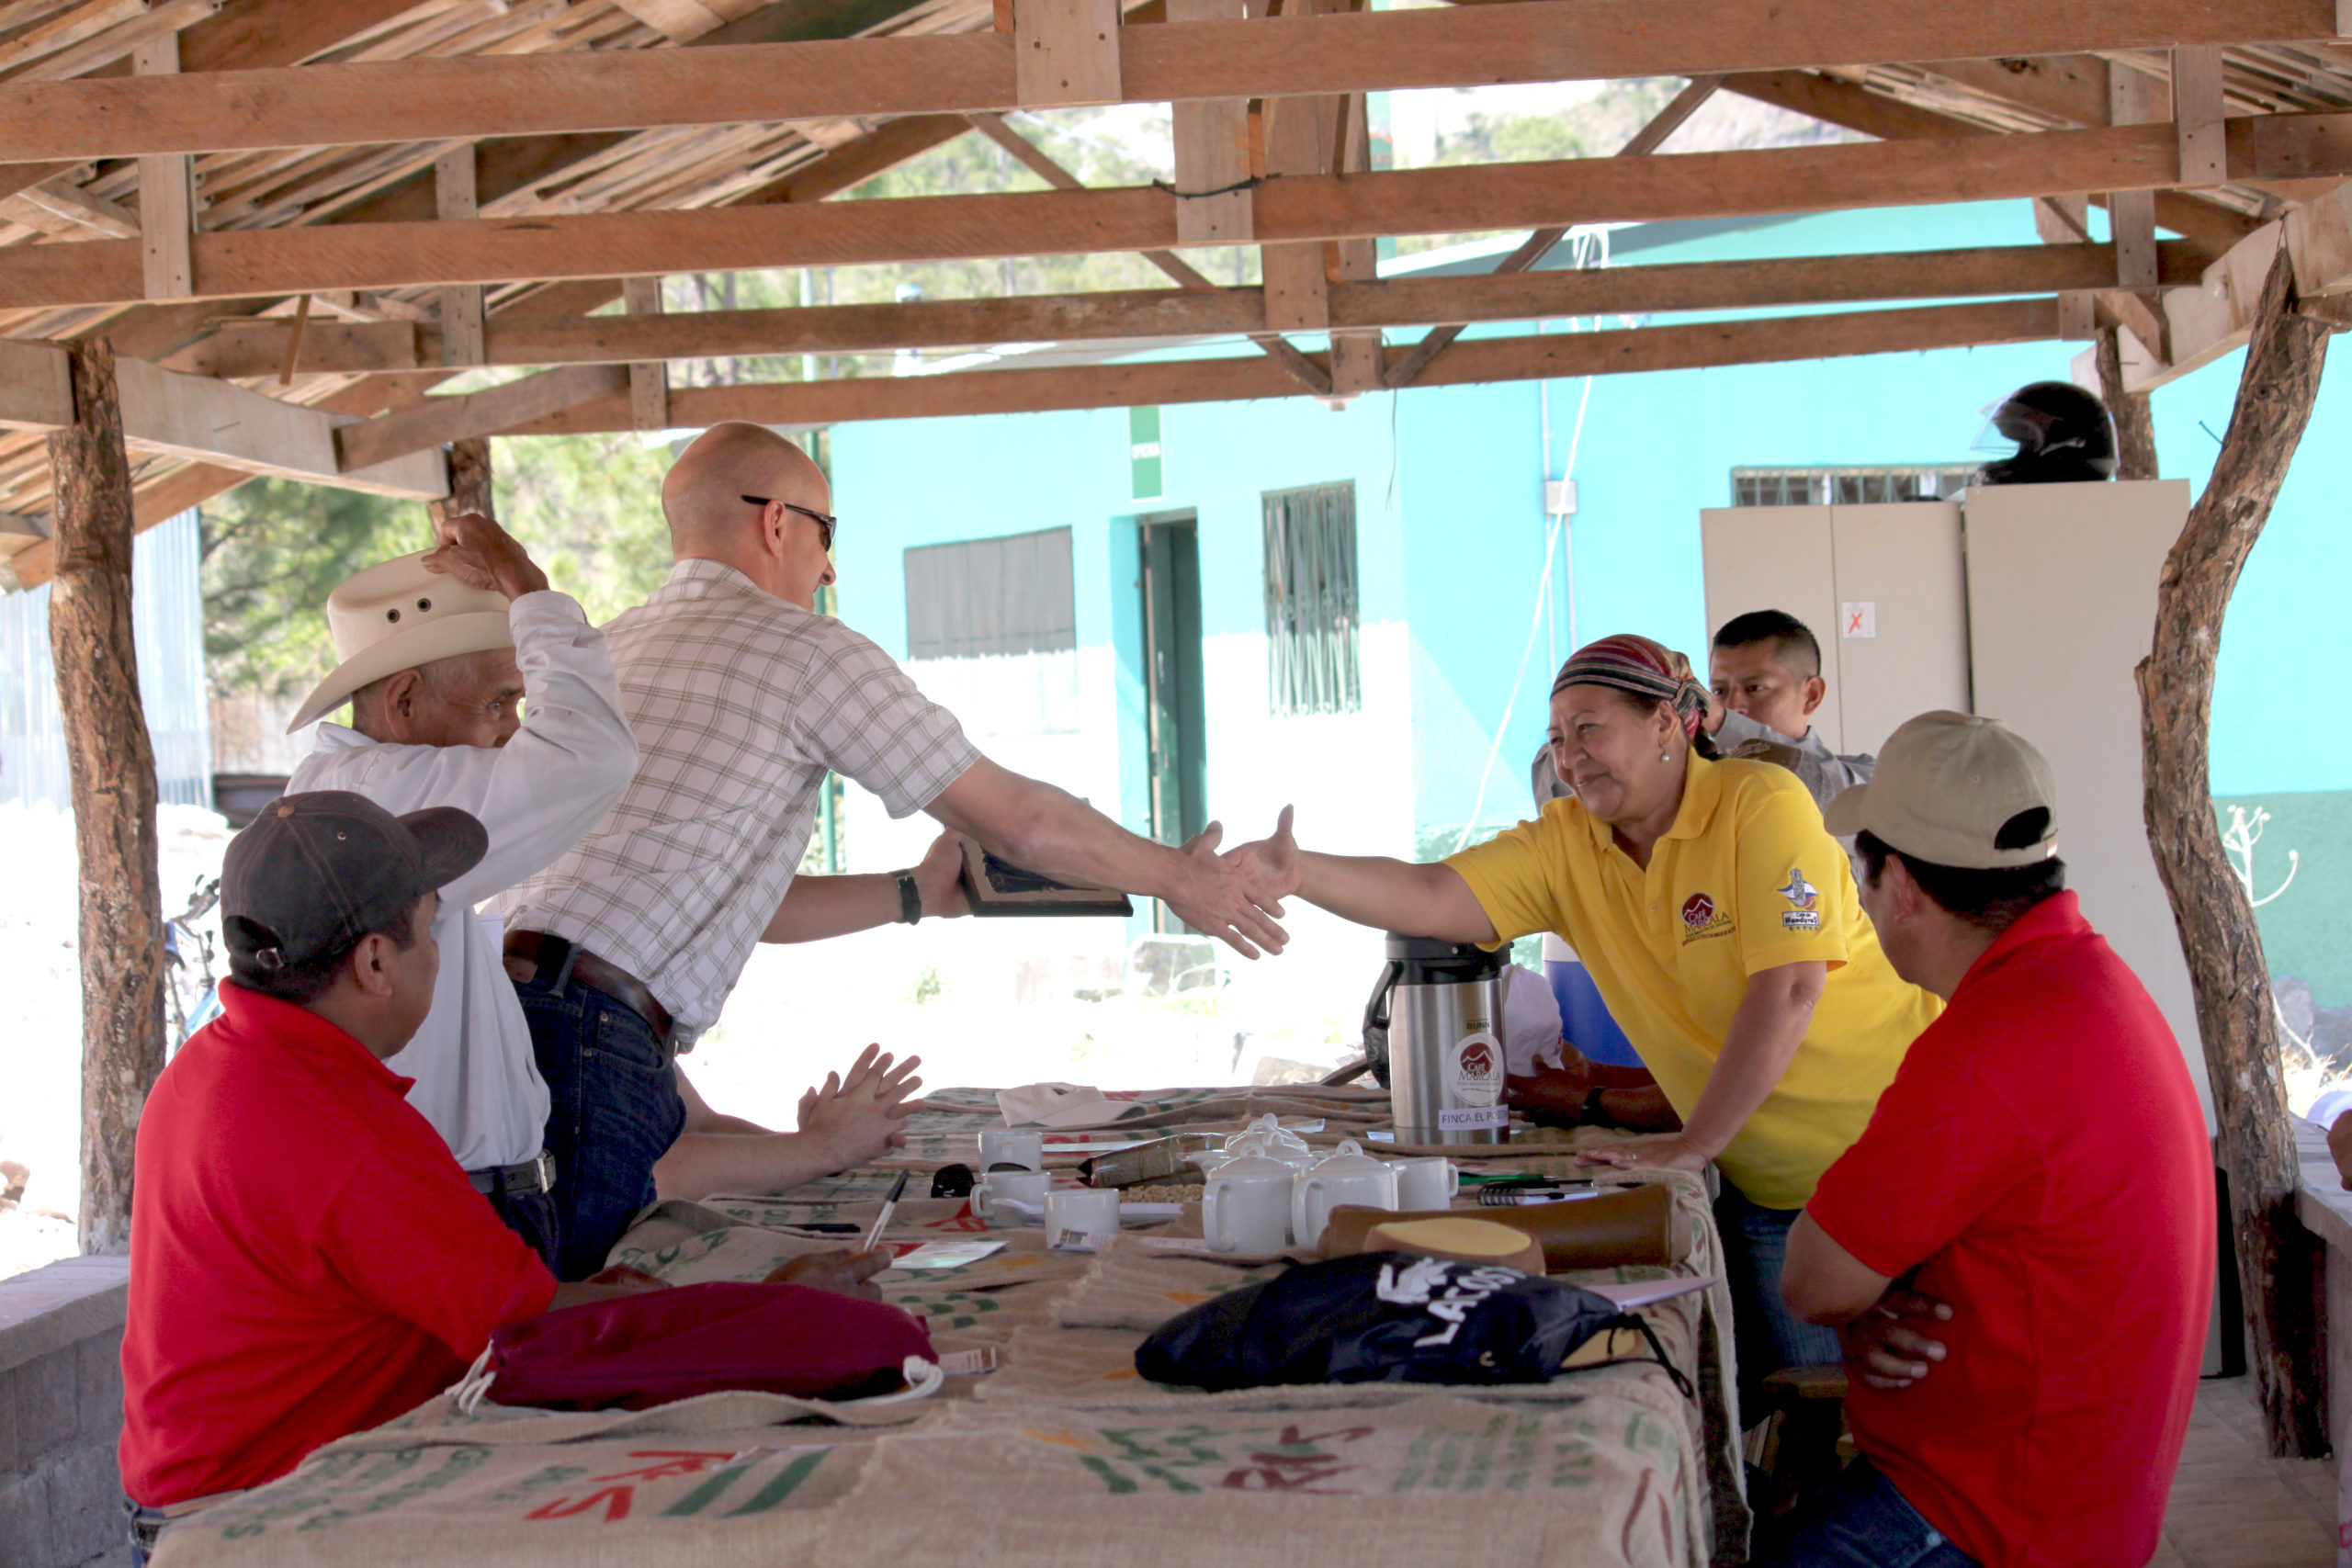 Melba Sosa of RAOS shakes hands with Willy Foote across a table with other members f the cooperative.